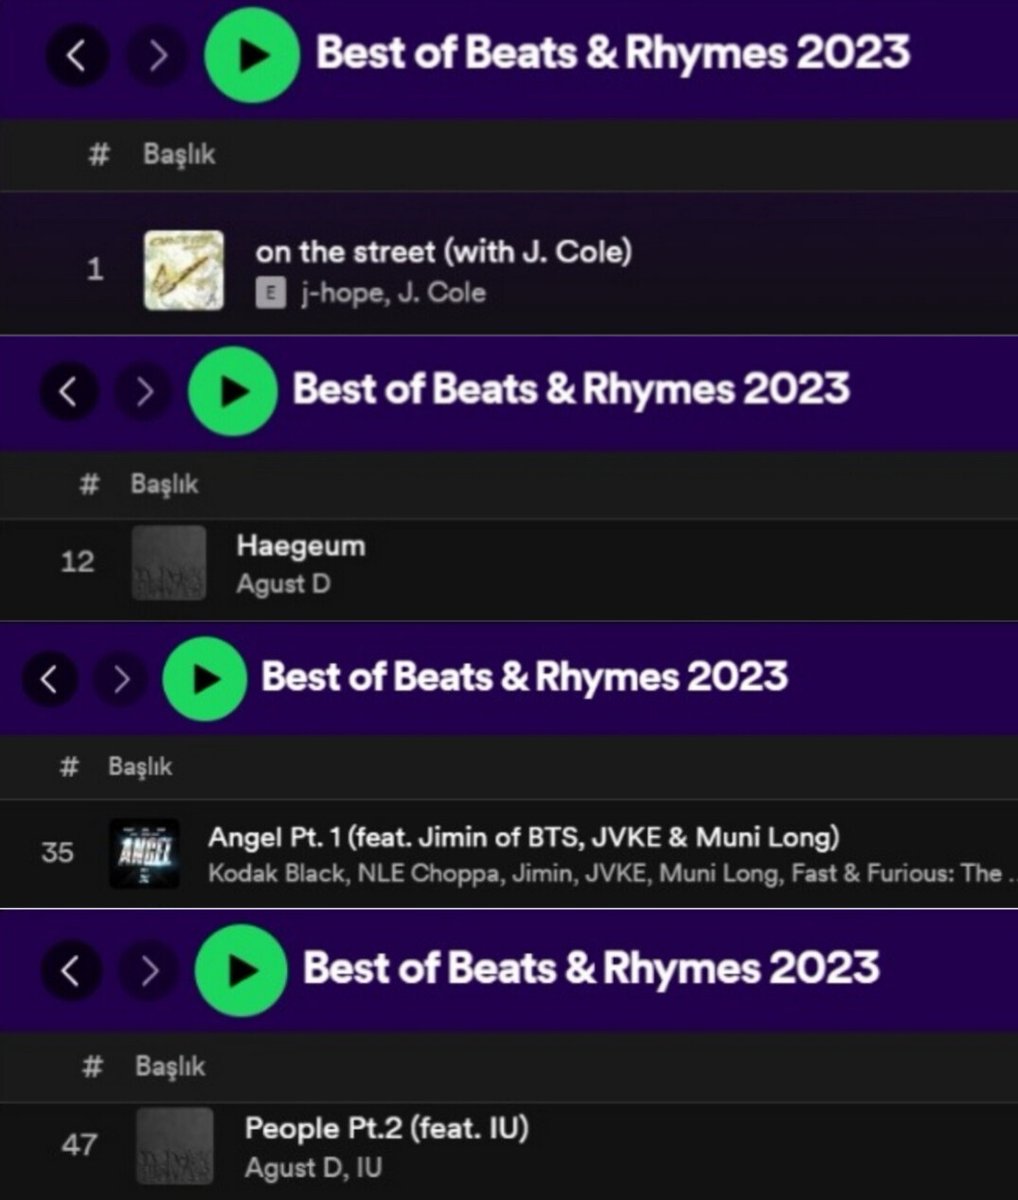 Spotify Wrapped 'Best of Beats & Rhymes 2023' listesi; #1 J-Hope - on the street #12 Agust D - Haegeum #35 Jimin - Angel Pt.1 #47 Agust D - People Pt.2 🔗open.spotify.com/playlist/37i9d…